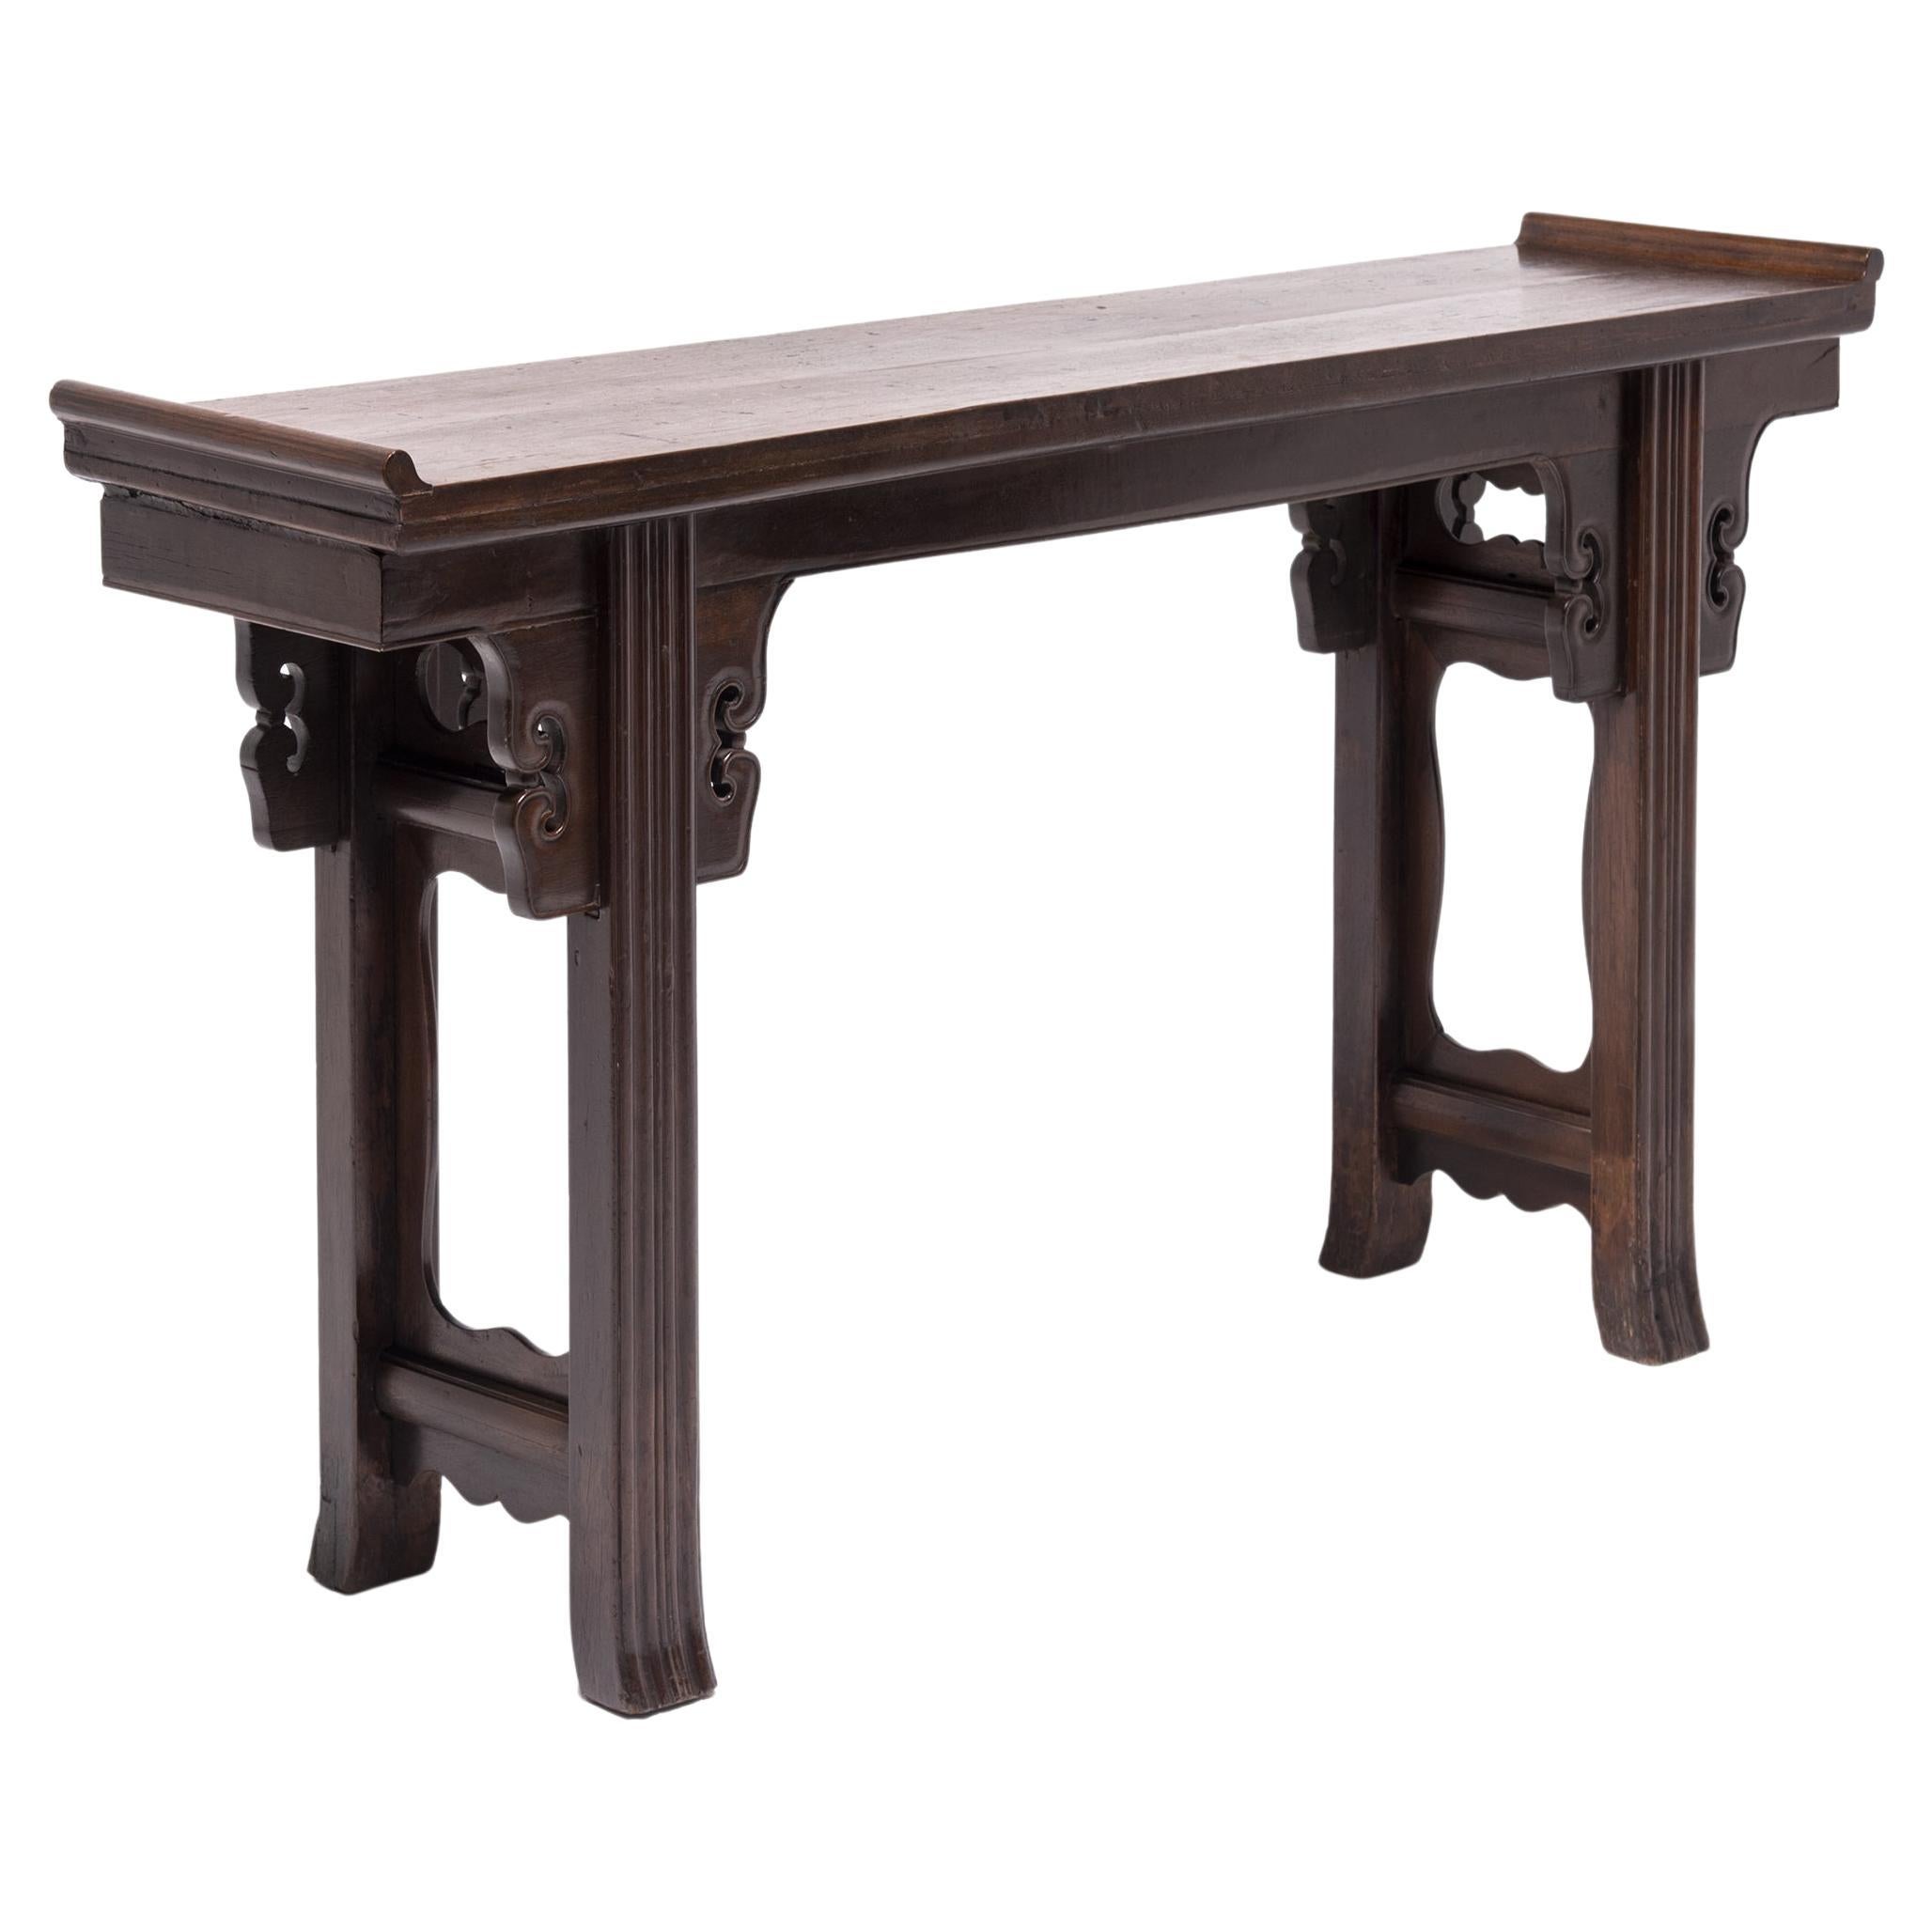 Chinese Altar Table with Everted Ends, c. 1850 For Sale